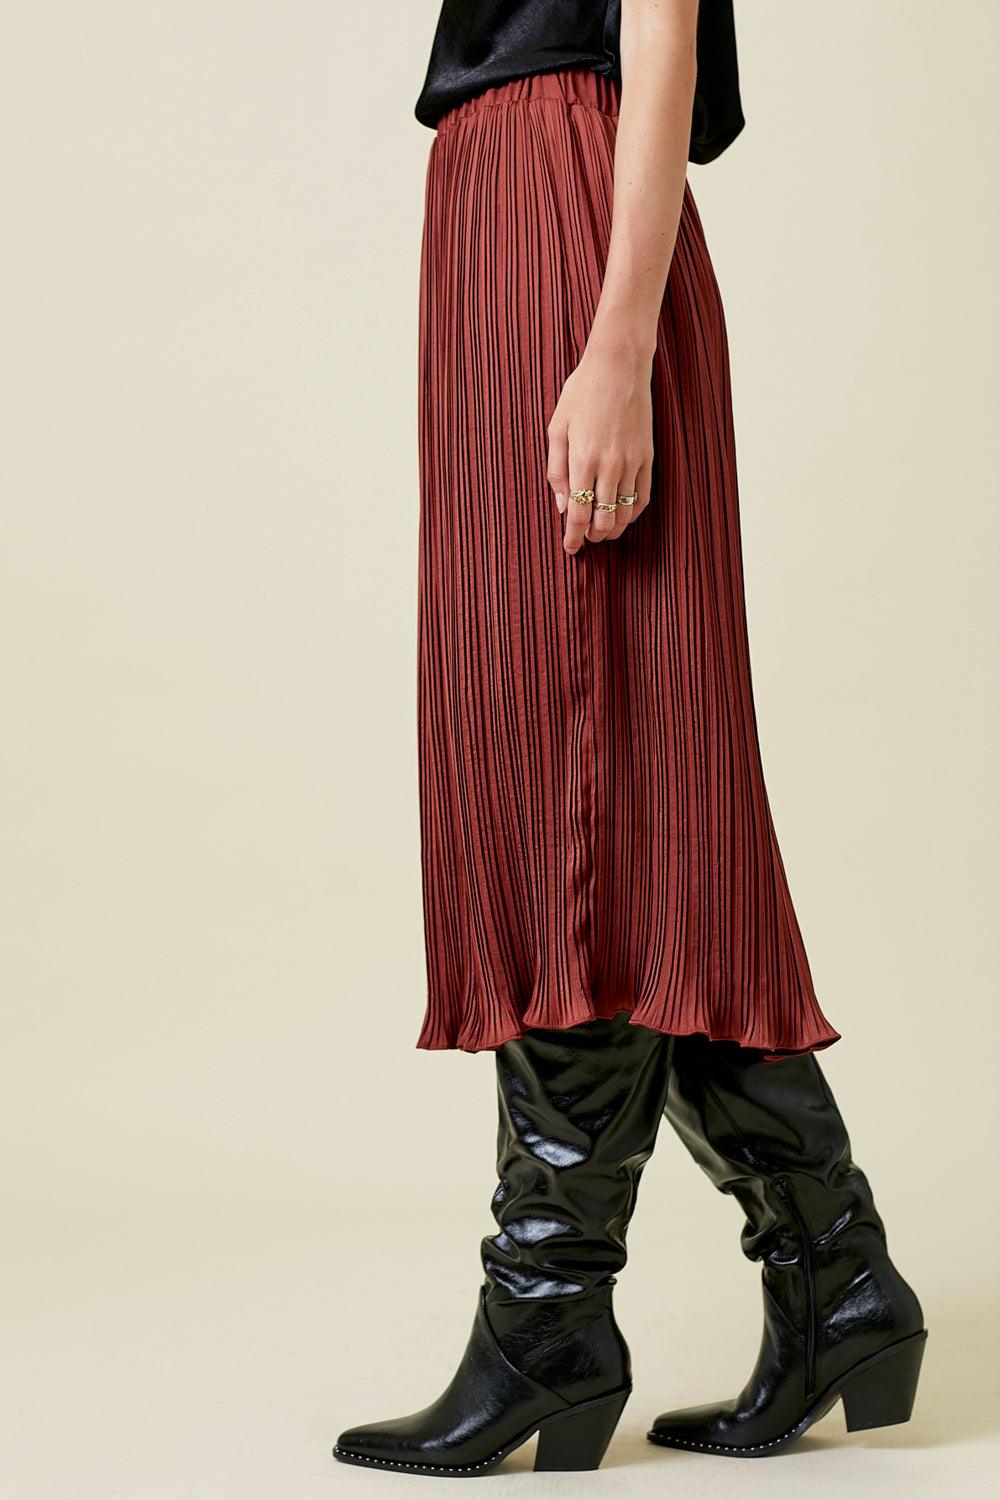 Rust Pleated Skirt - Strawberry Moon Boutique